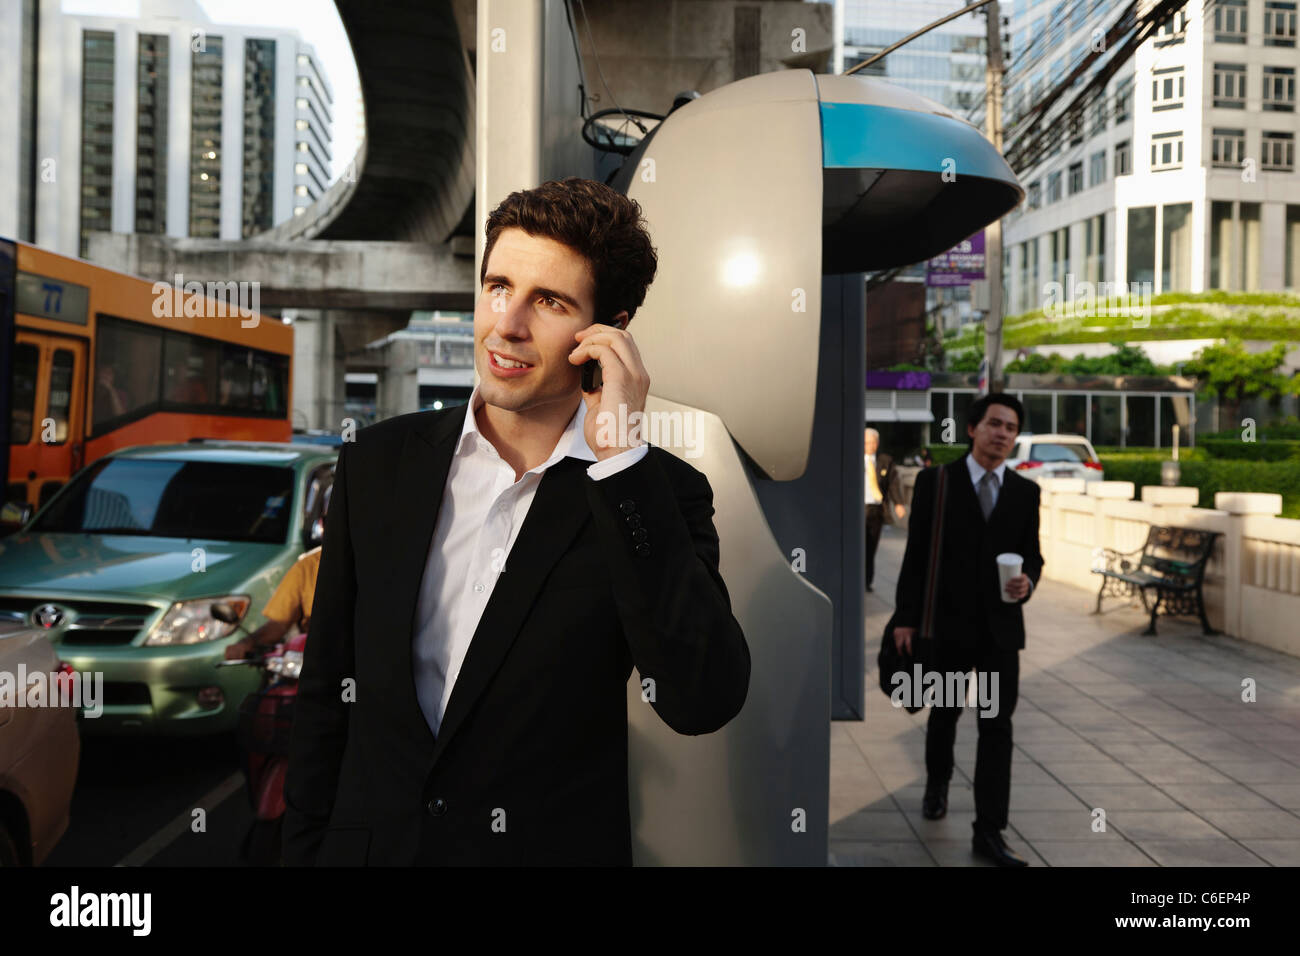 Caucasian businessman talking on cell phone Banque D'Images